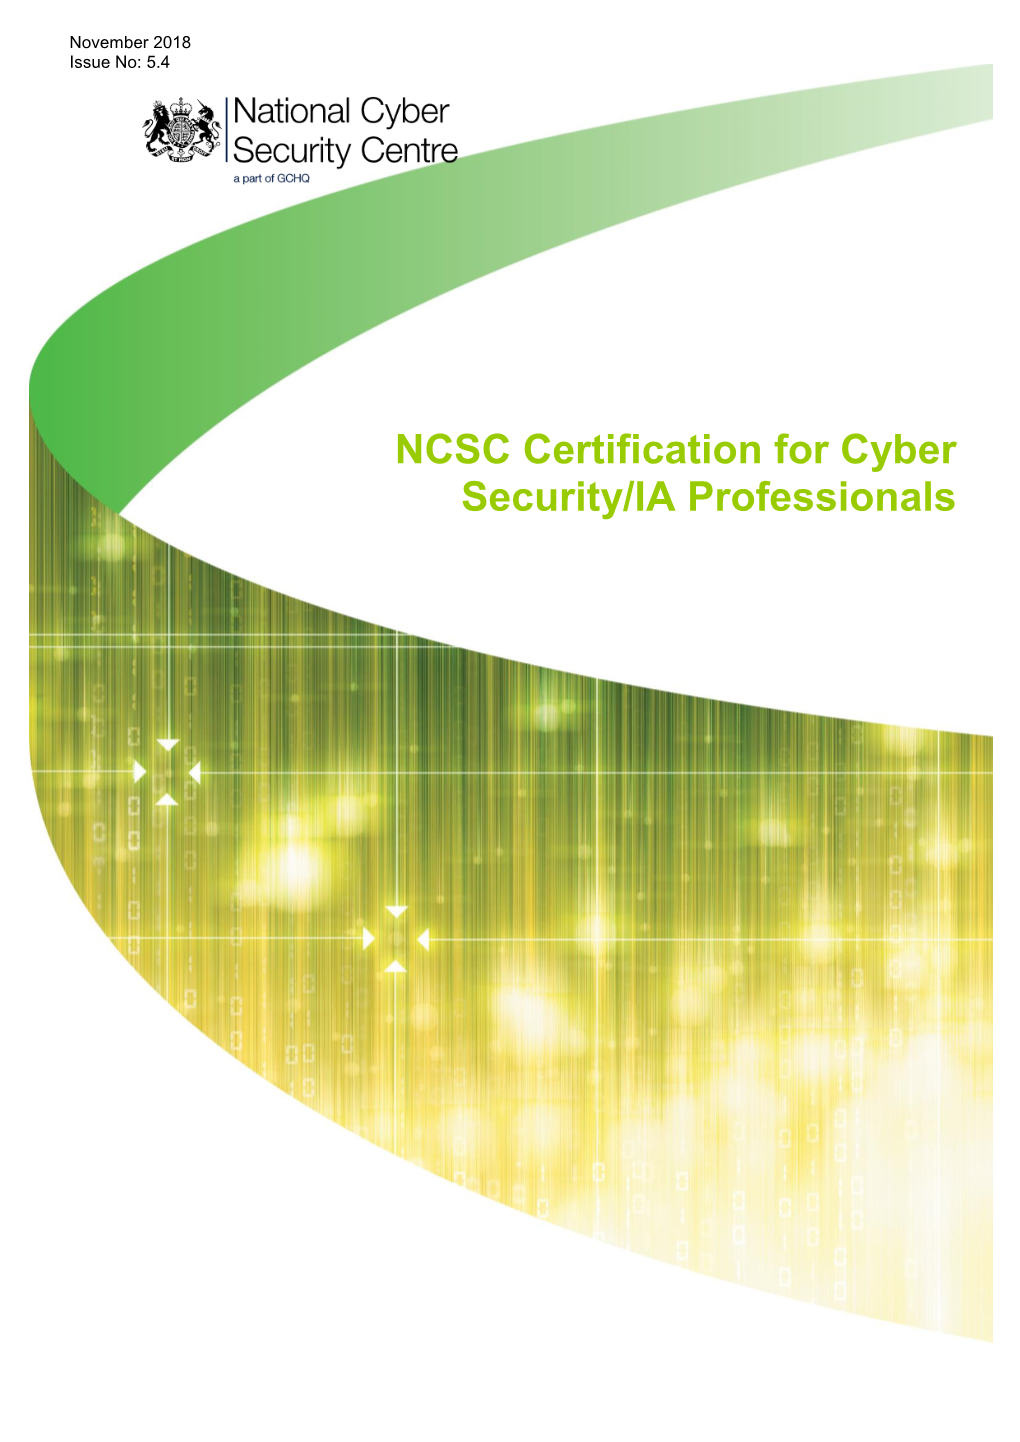 NCSC Certification for Cyber Security/IA Professionals